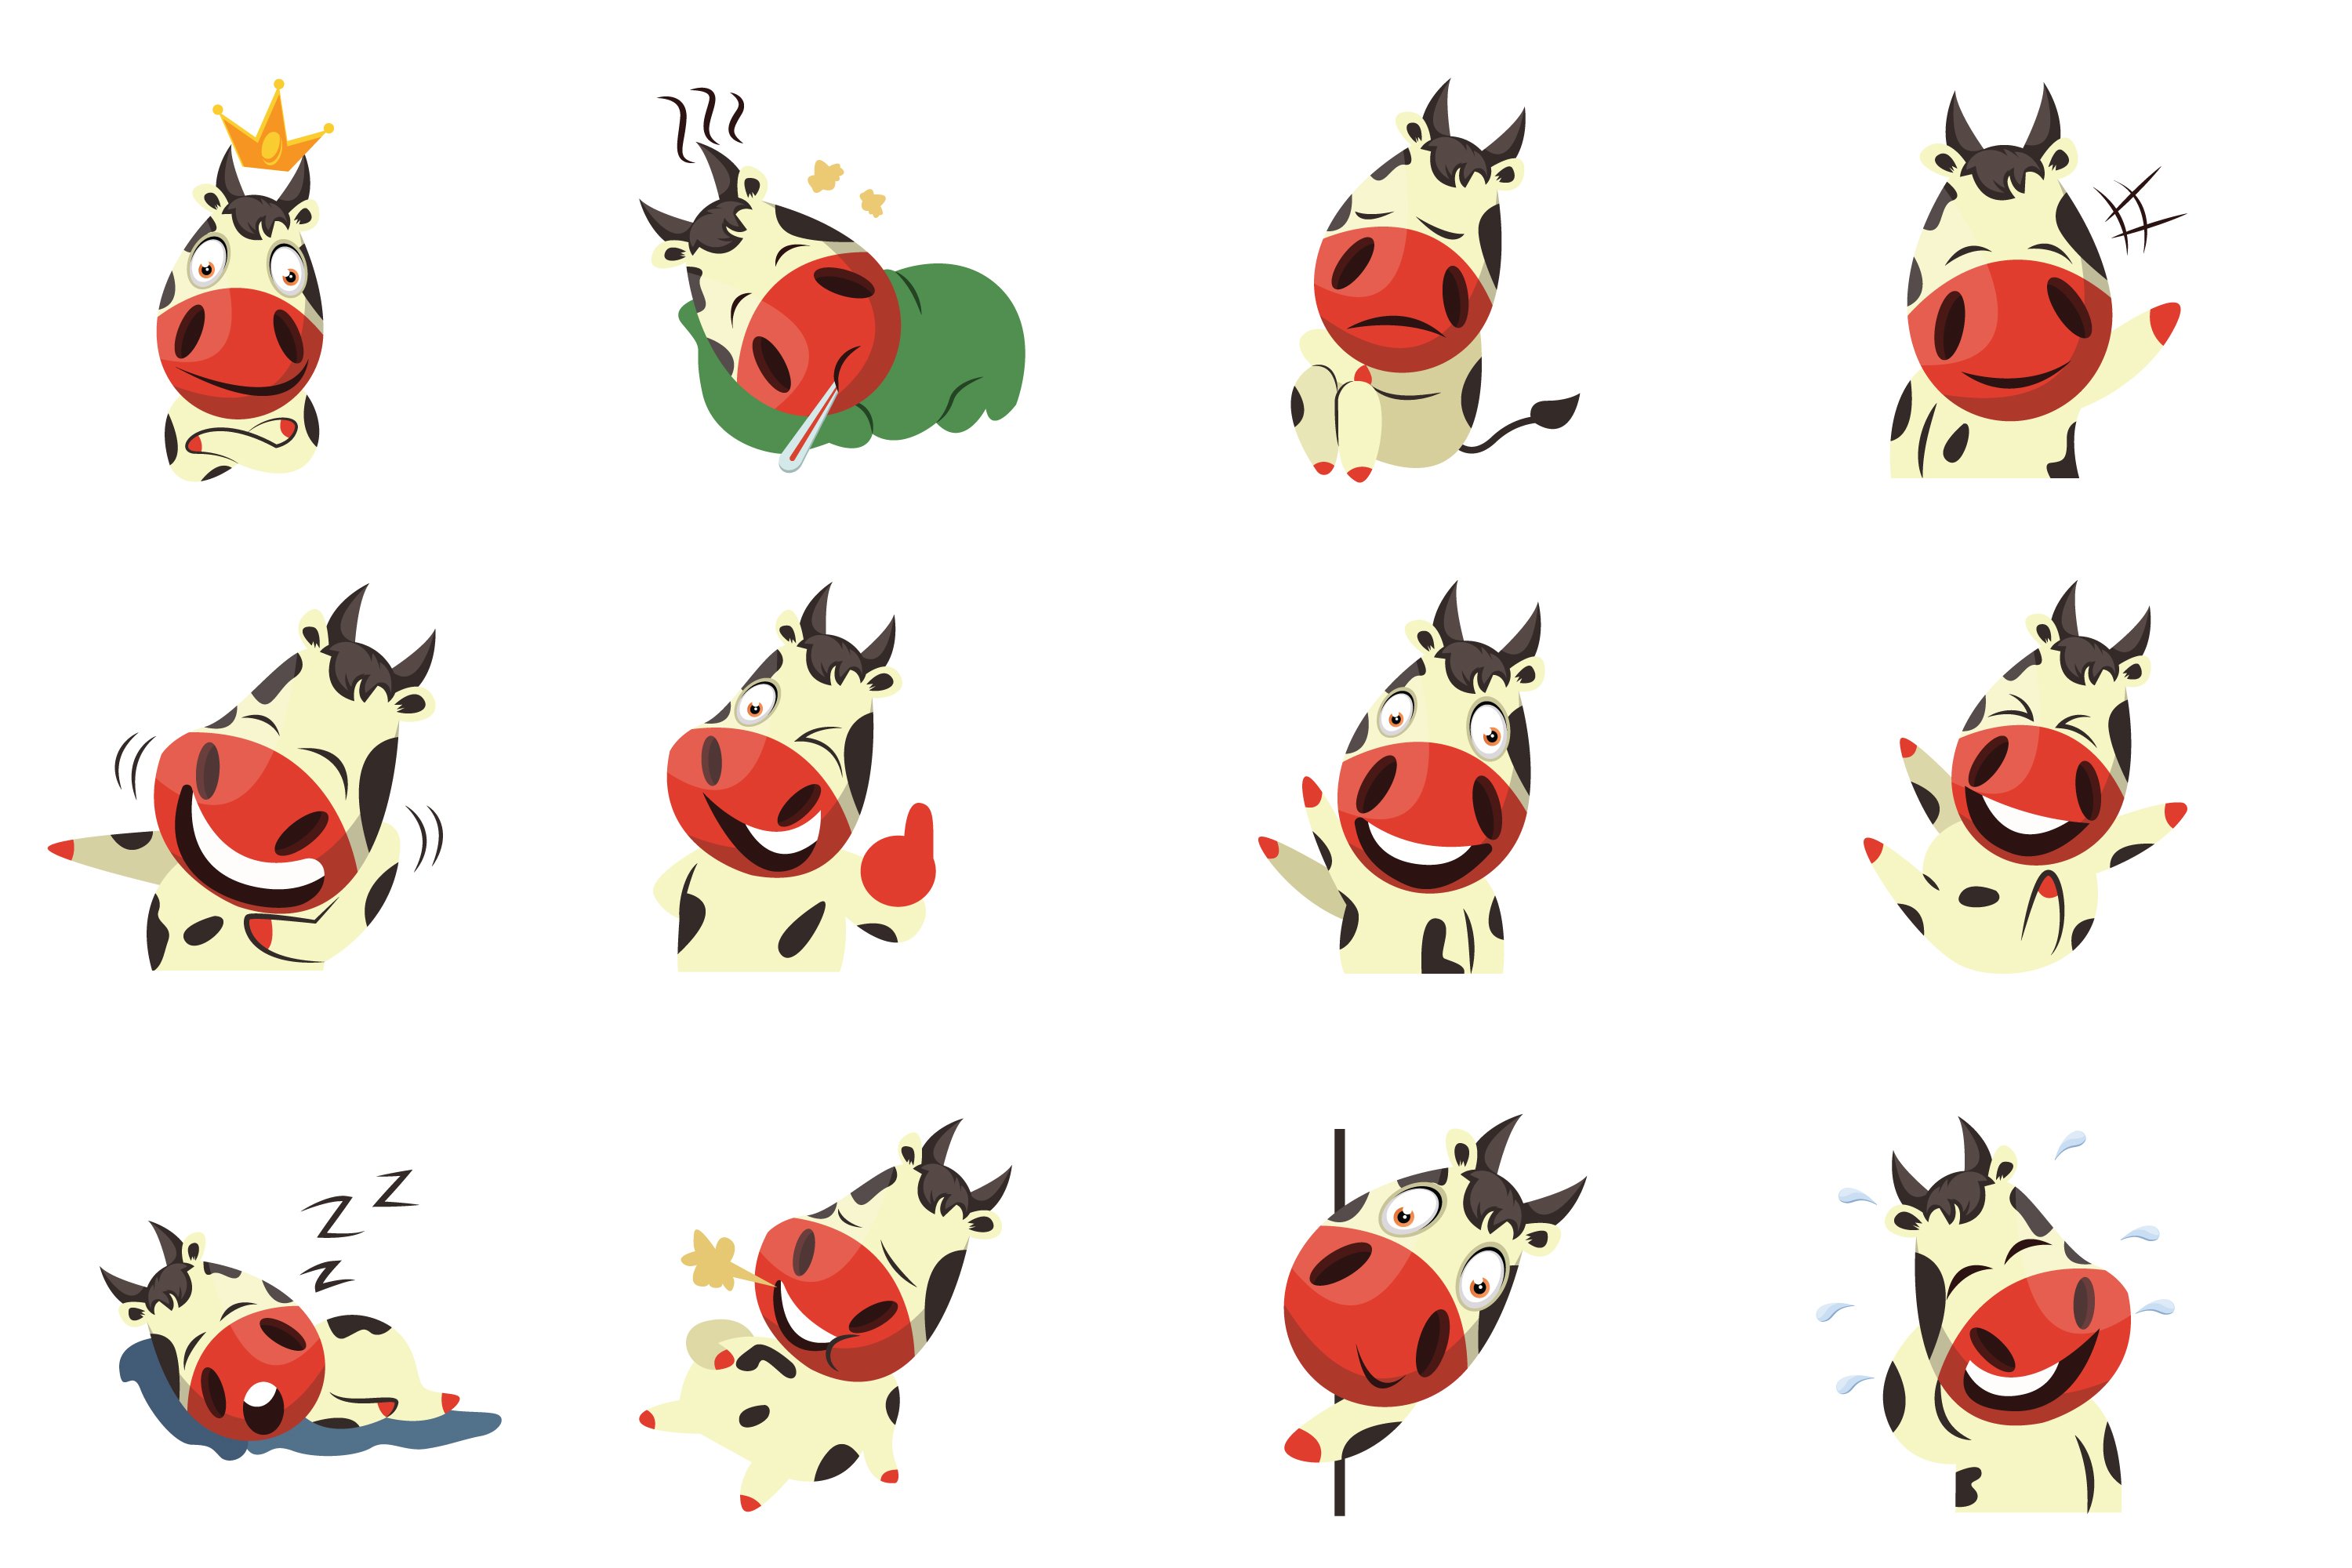 Pack of wonderful images of cows emoticons.